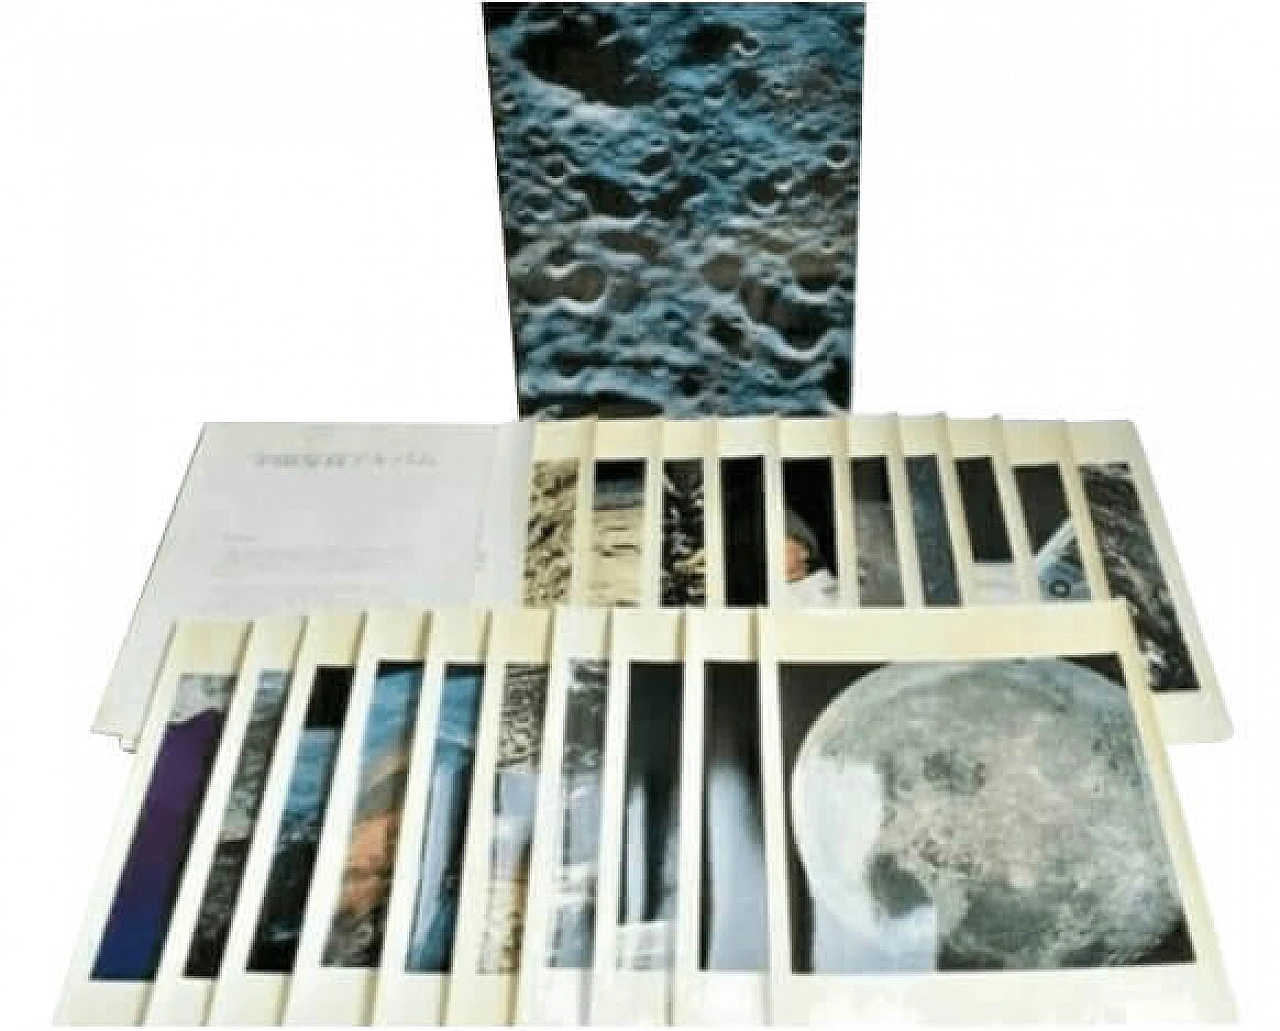 Moon landing photo set with official Nasa photos by Omega, 1969 1337137